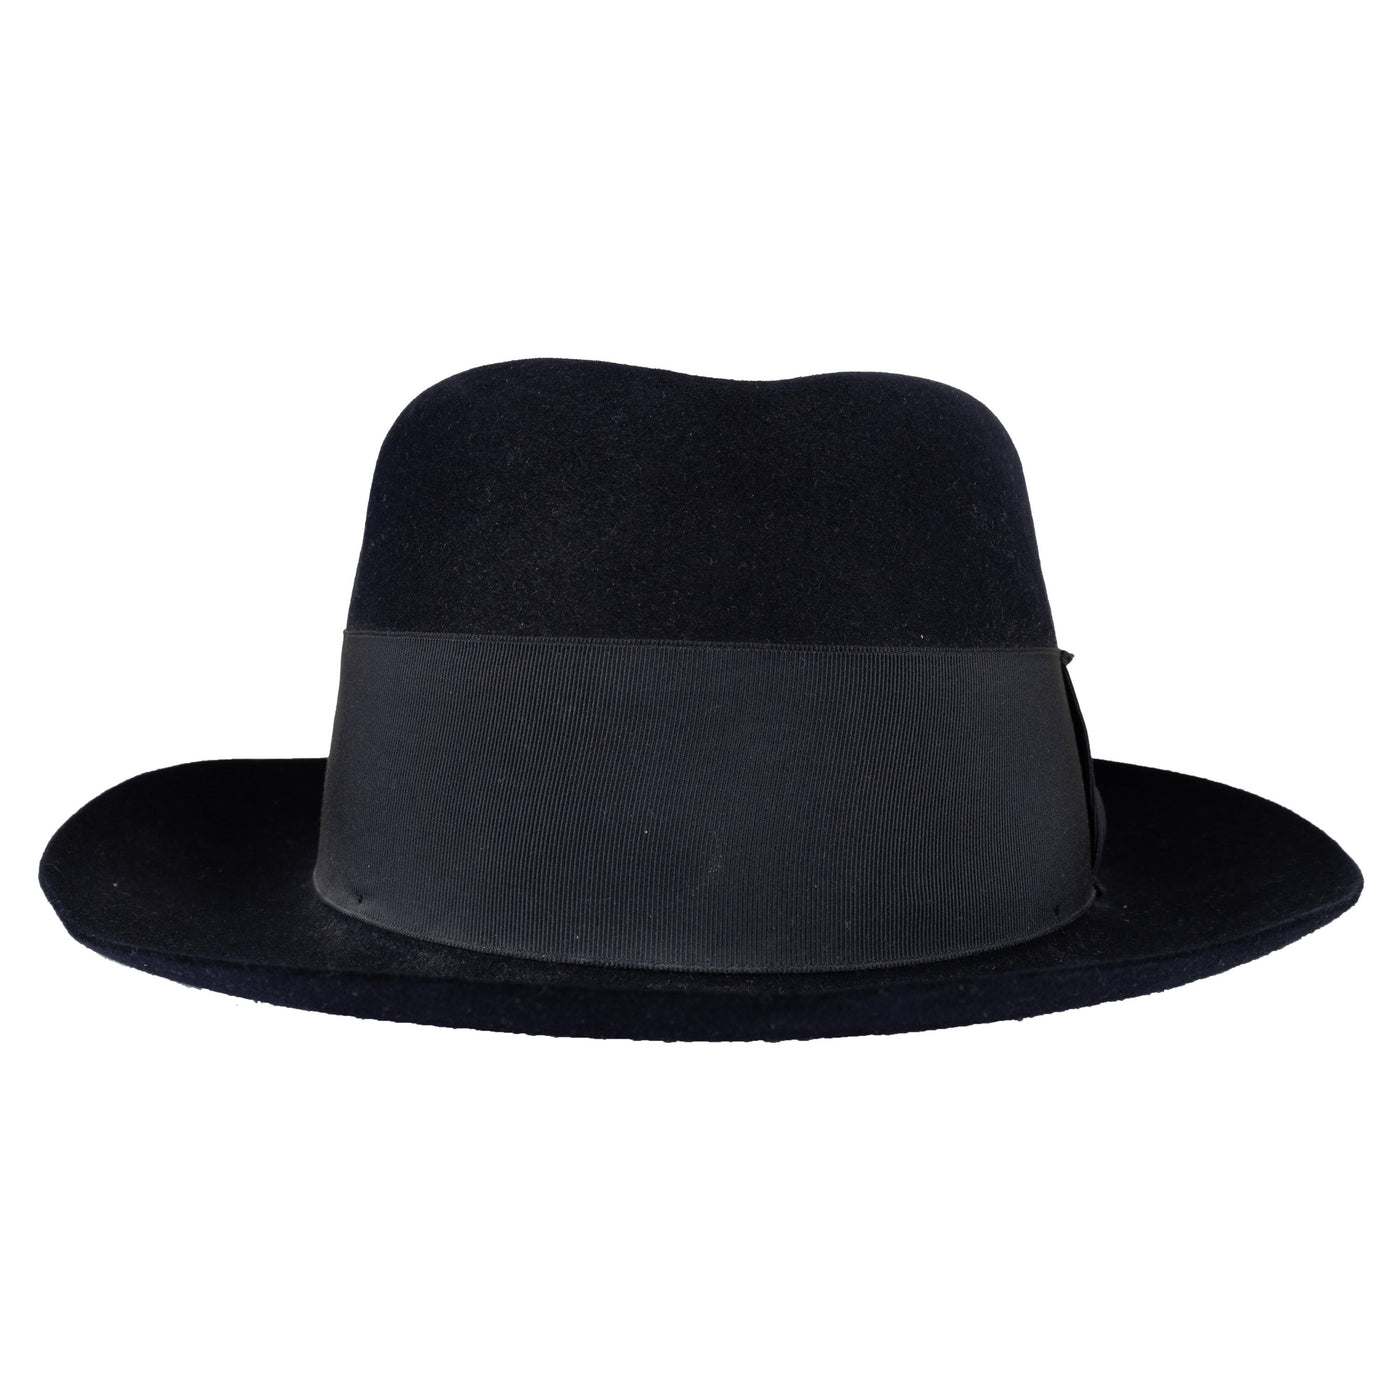 Secondhand Lincoln Bennett Trilby Hat 